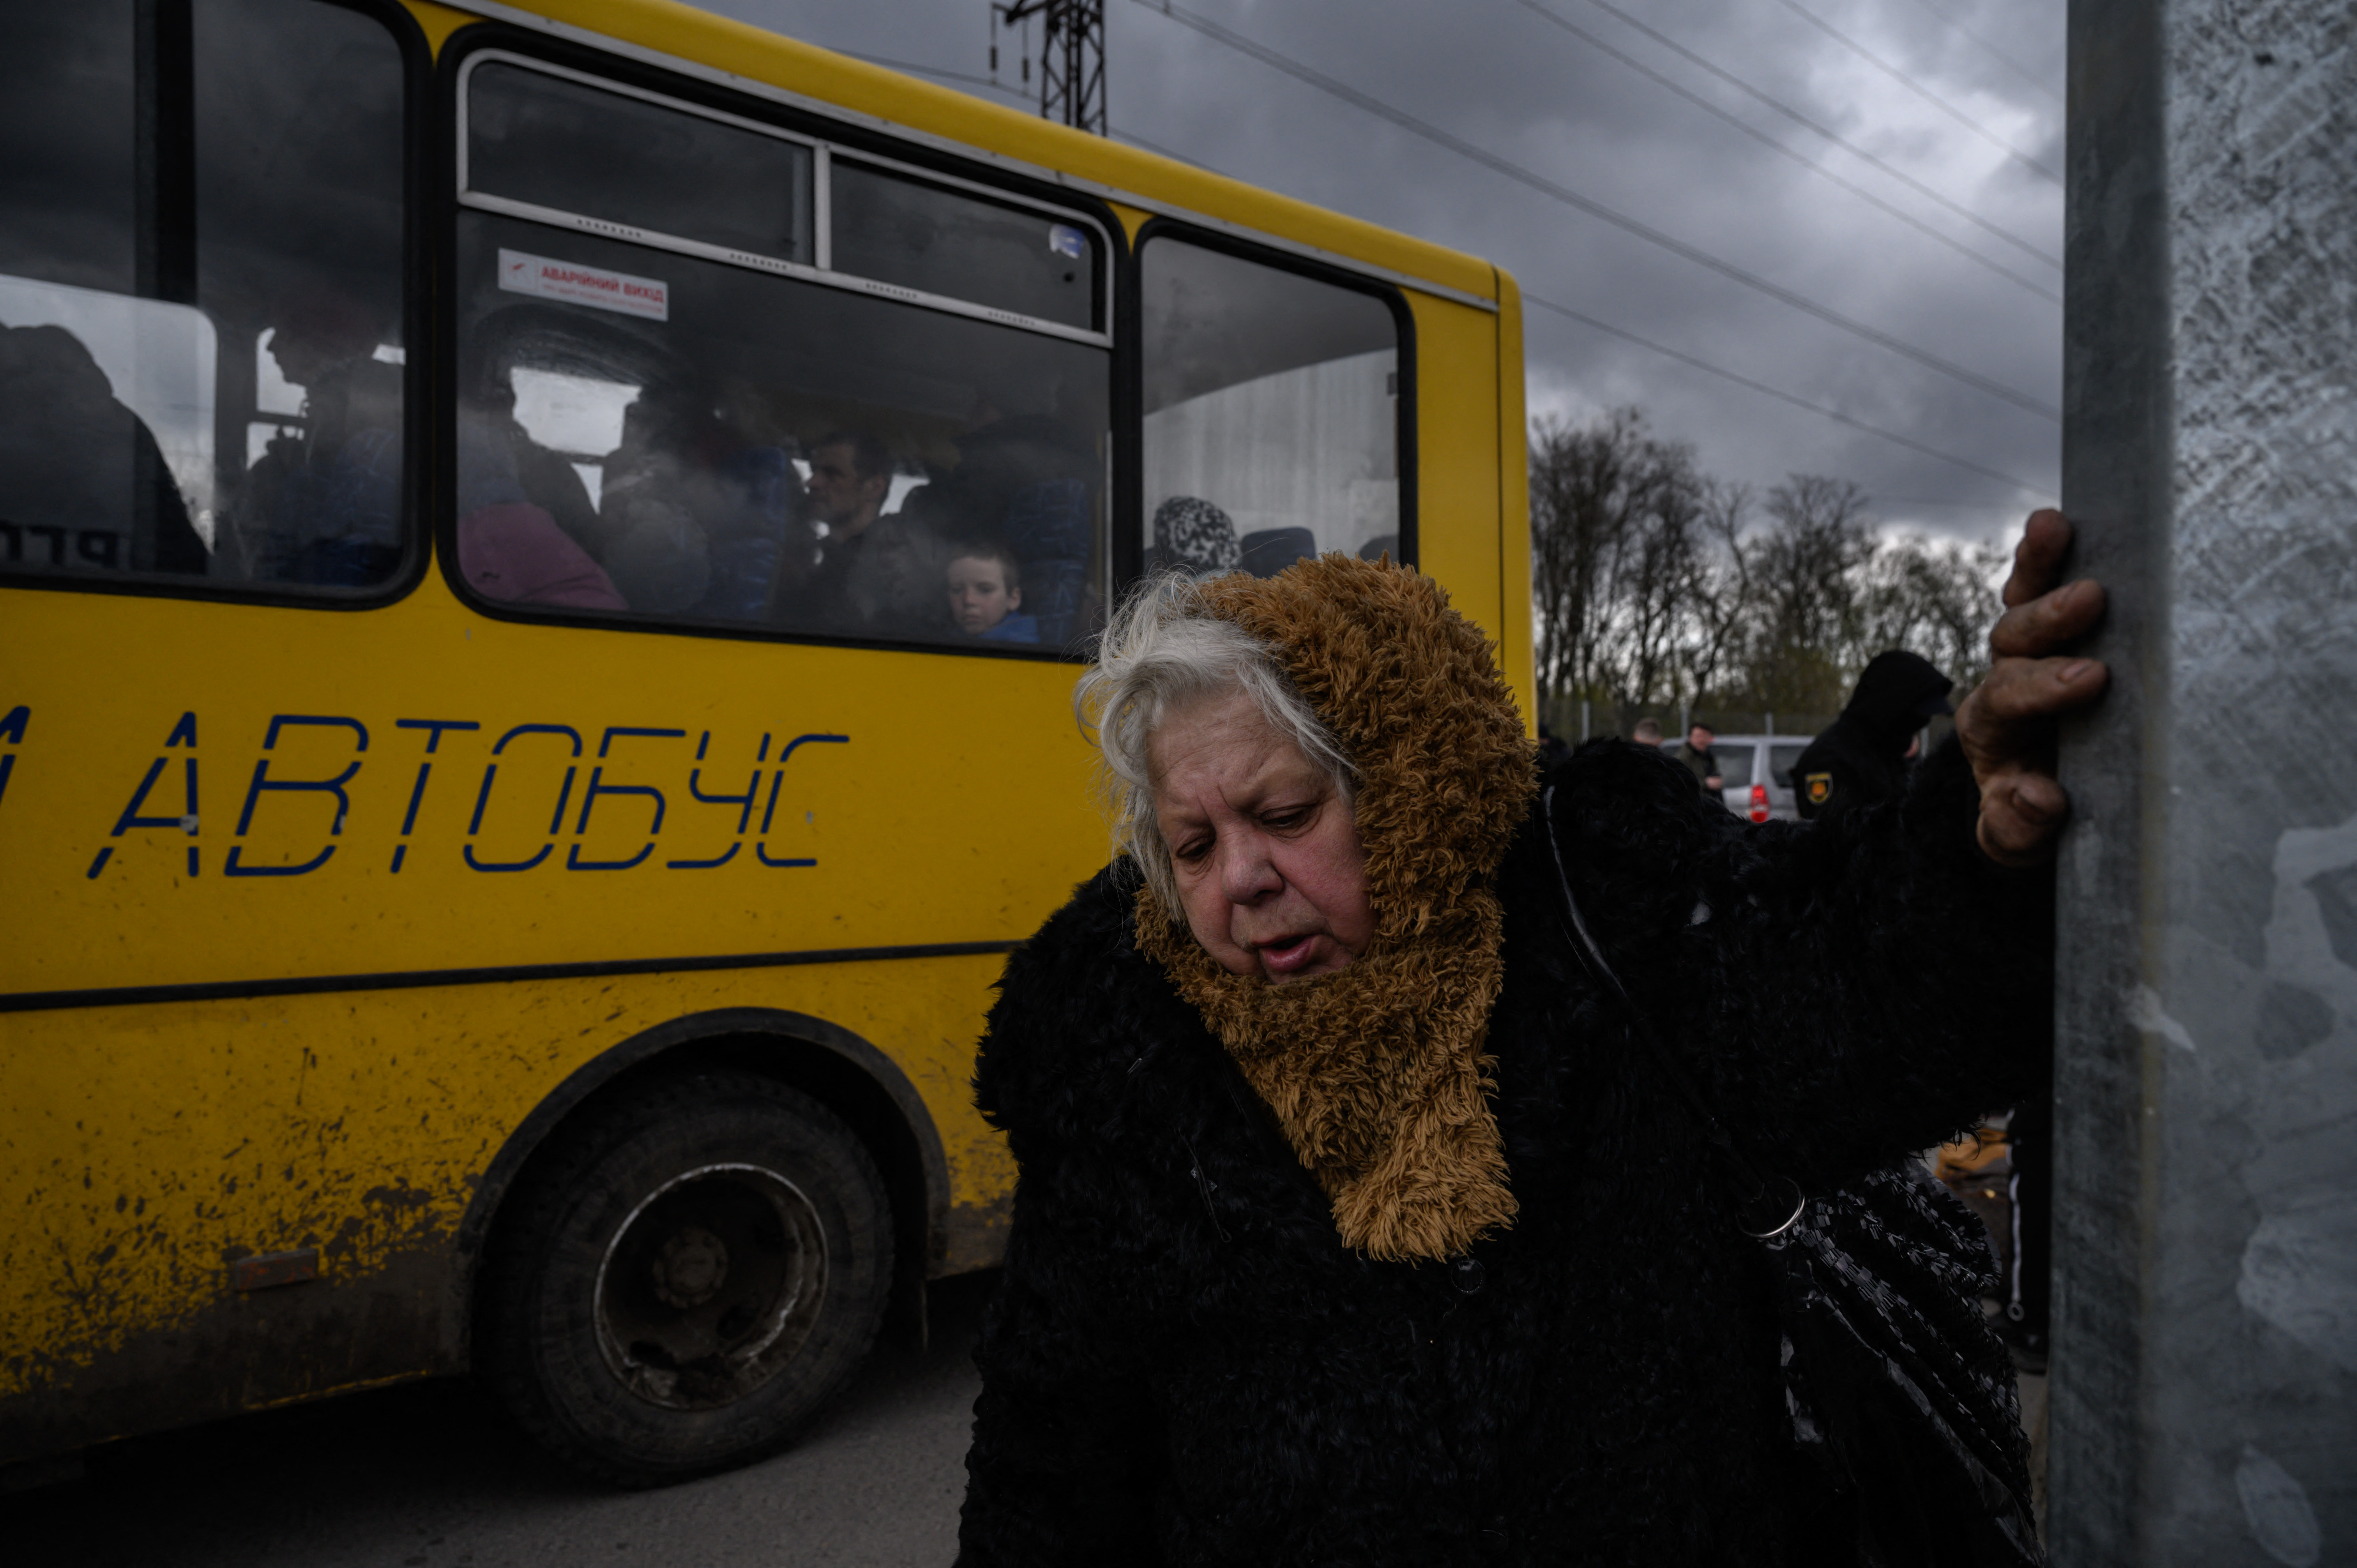 People fleeing fighting in the southern city of Mariupol meet with relatives and friends as they arrive in a small convoy after the opening of a humanitarian corridor, at a registration center for internally displaced people in Zaporizhzhia on April 21.